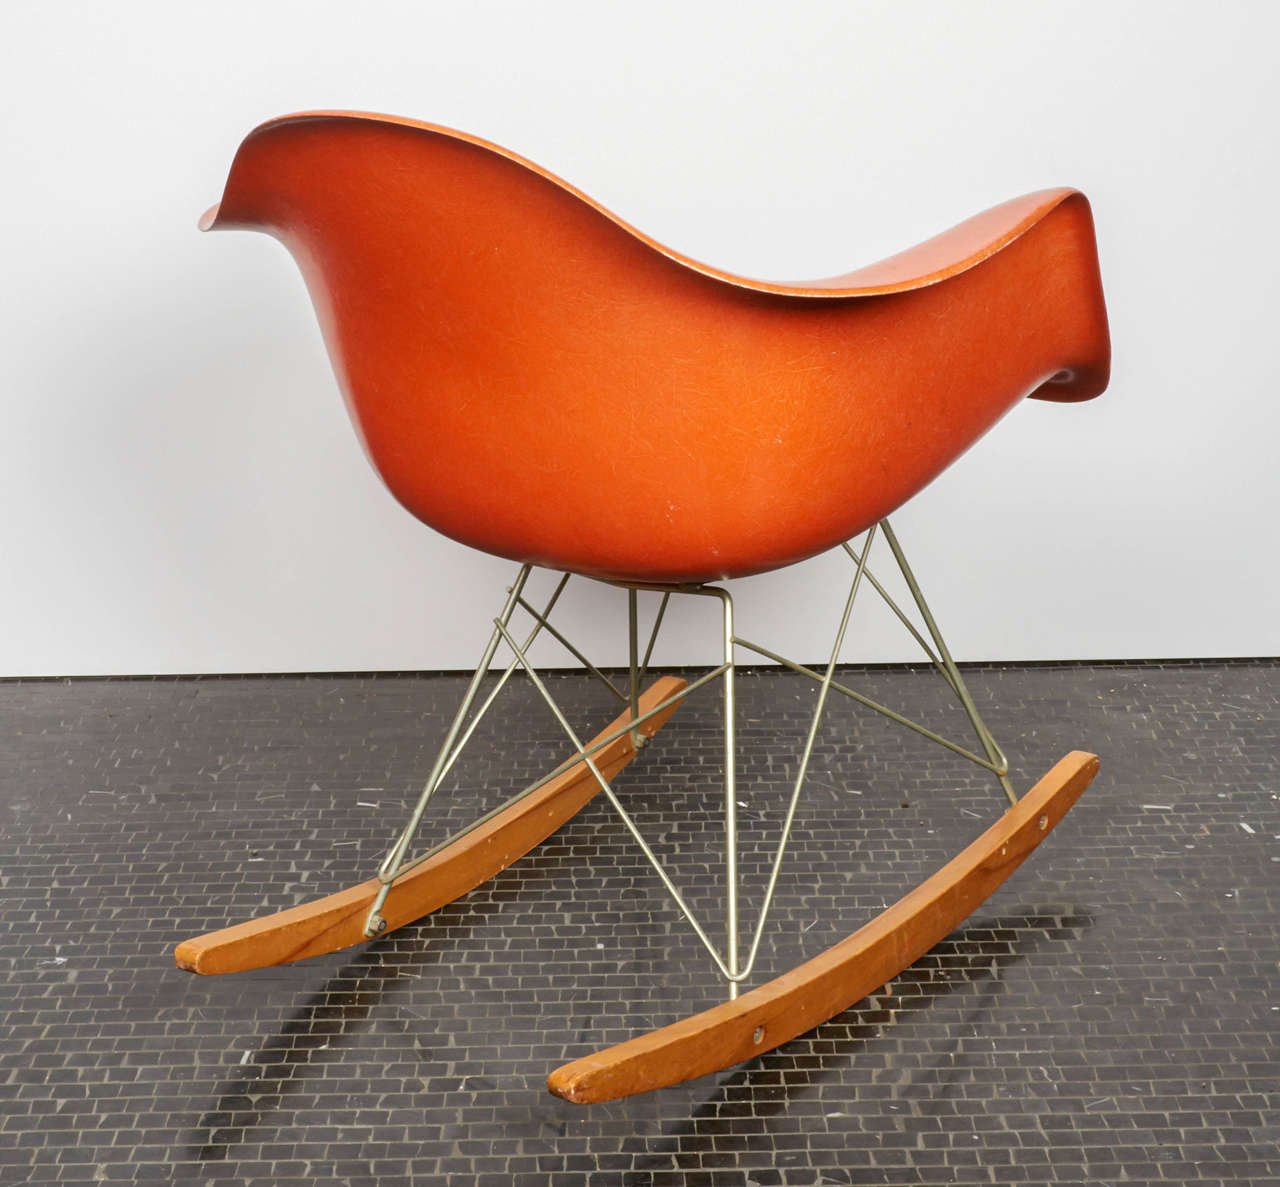 American Charles and Ray Eames Orange Fiberglass Rocker, Manufactured by Herman Miller